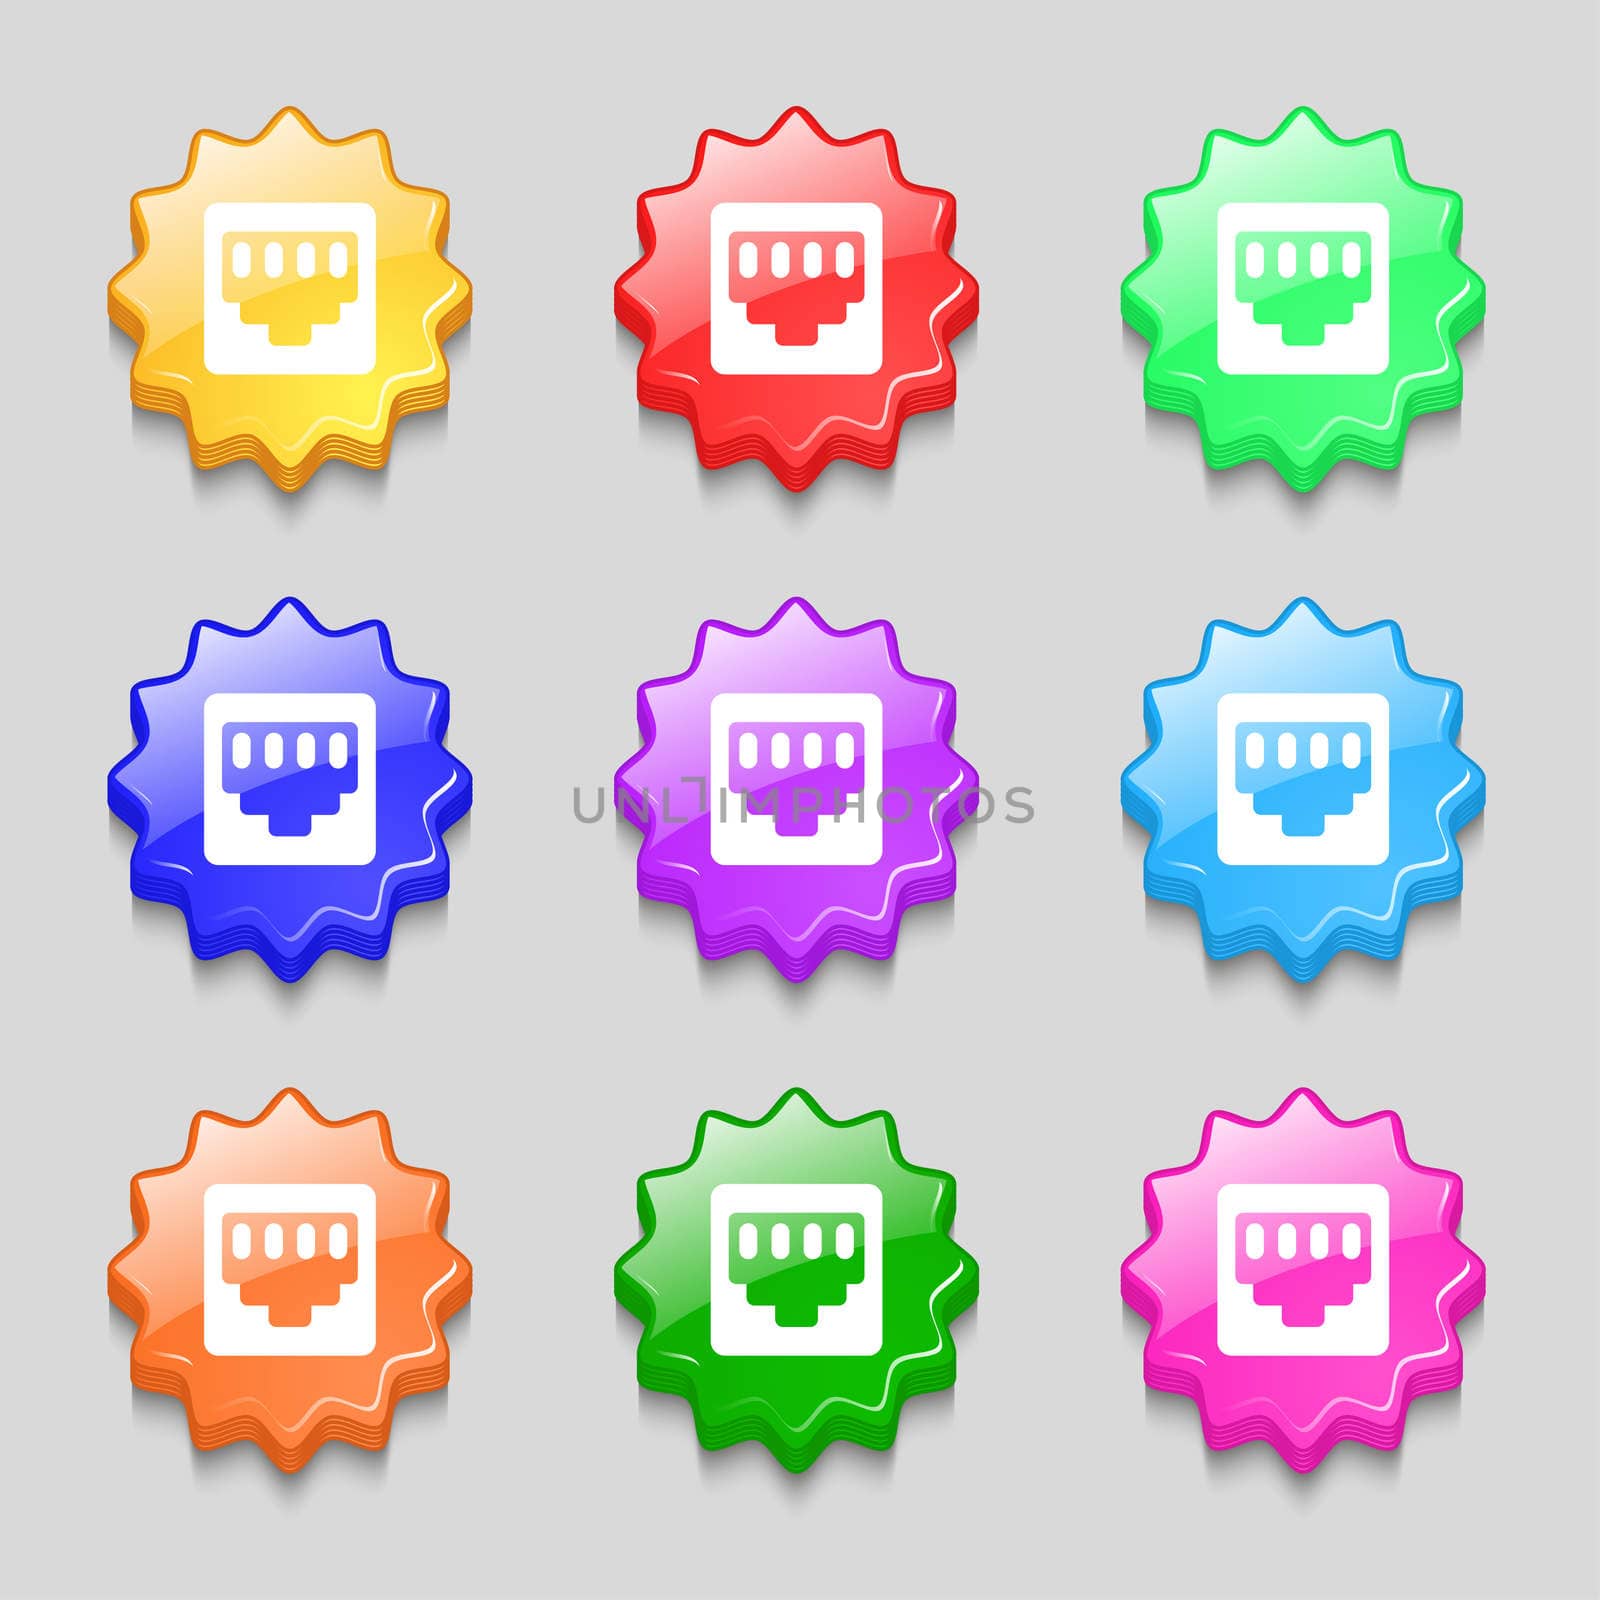 cable rj45, Patch Cord icon sign. symbol on nine wavy colourful buttons. illustration